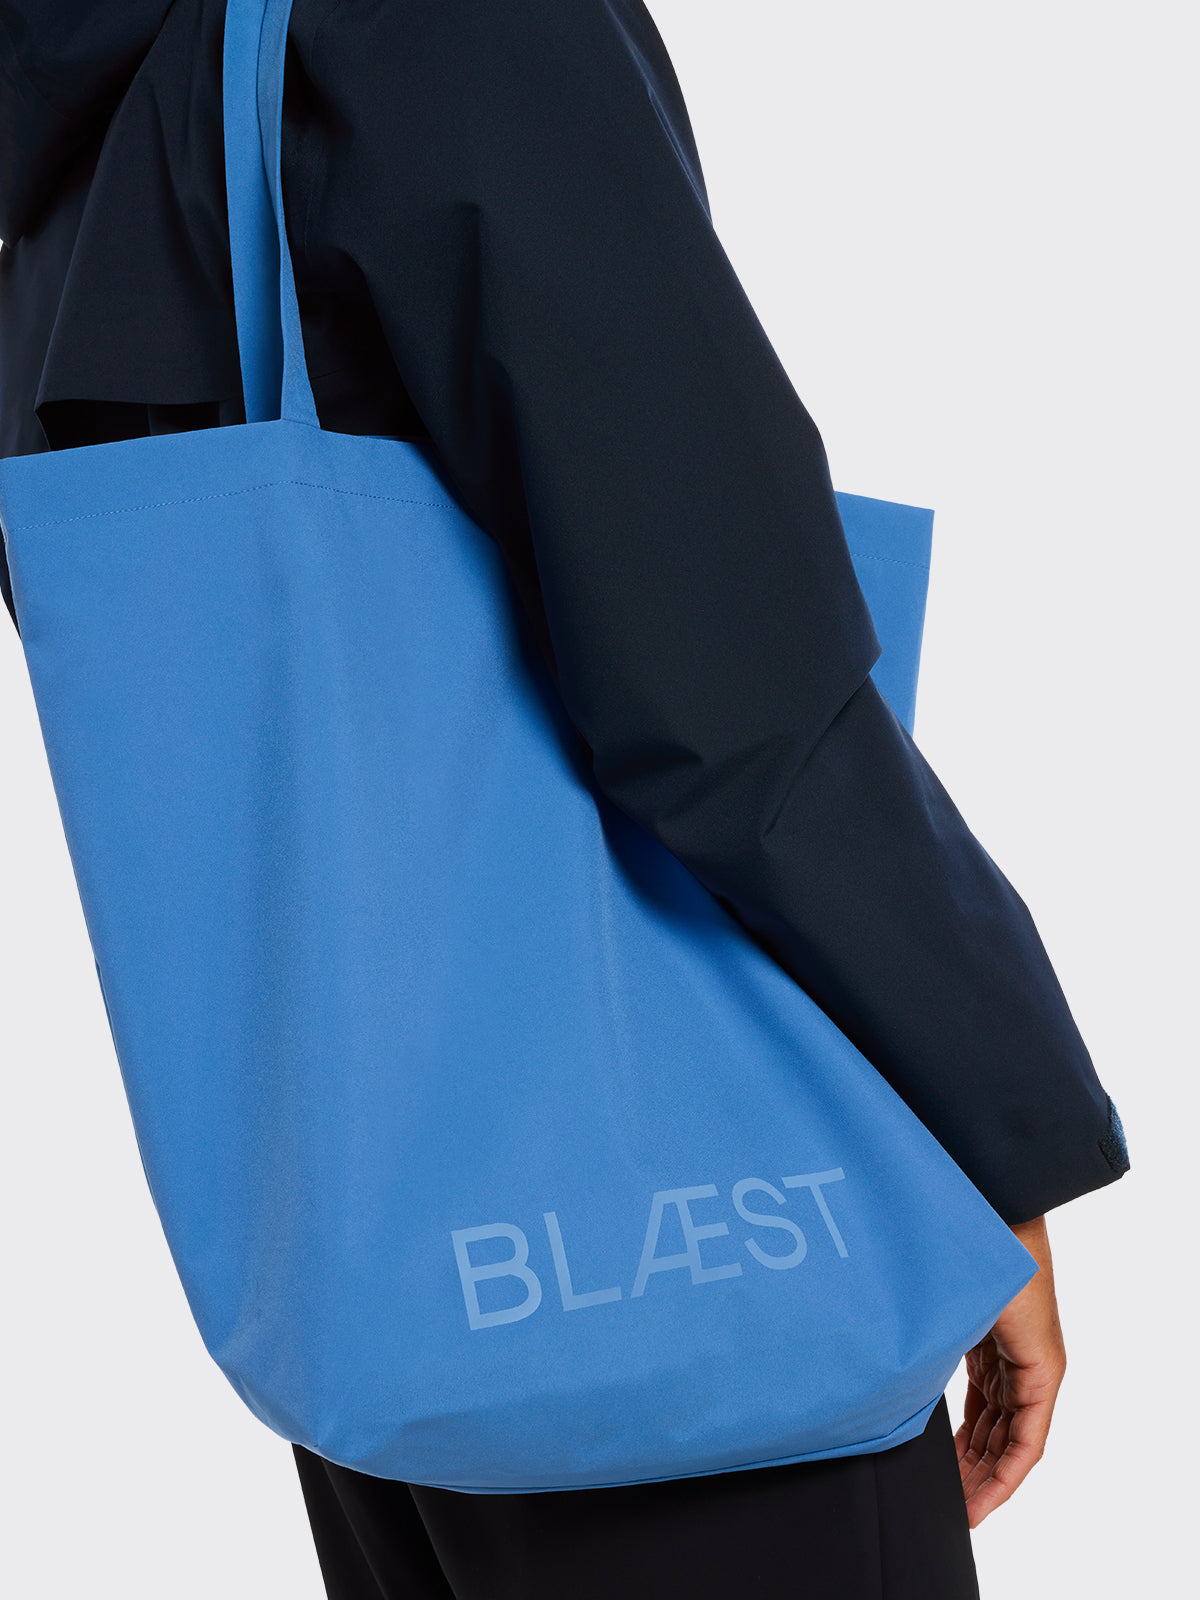 Moa tote bag from Blæst in Coronet Blue